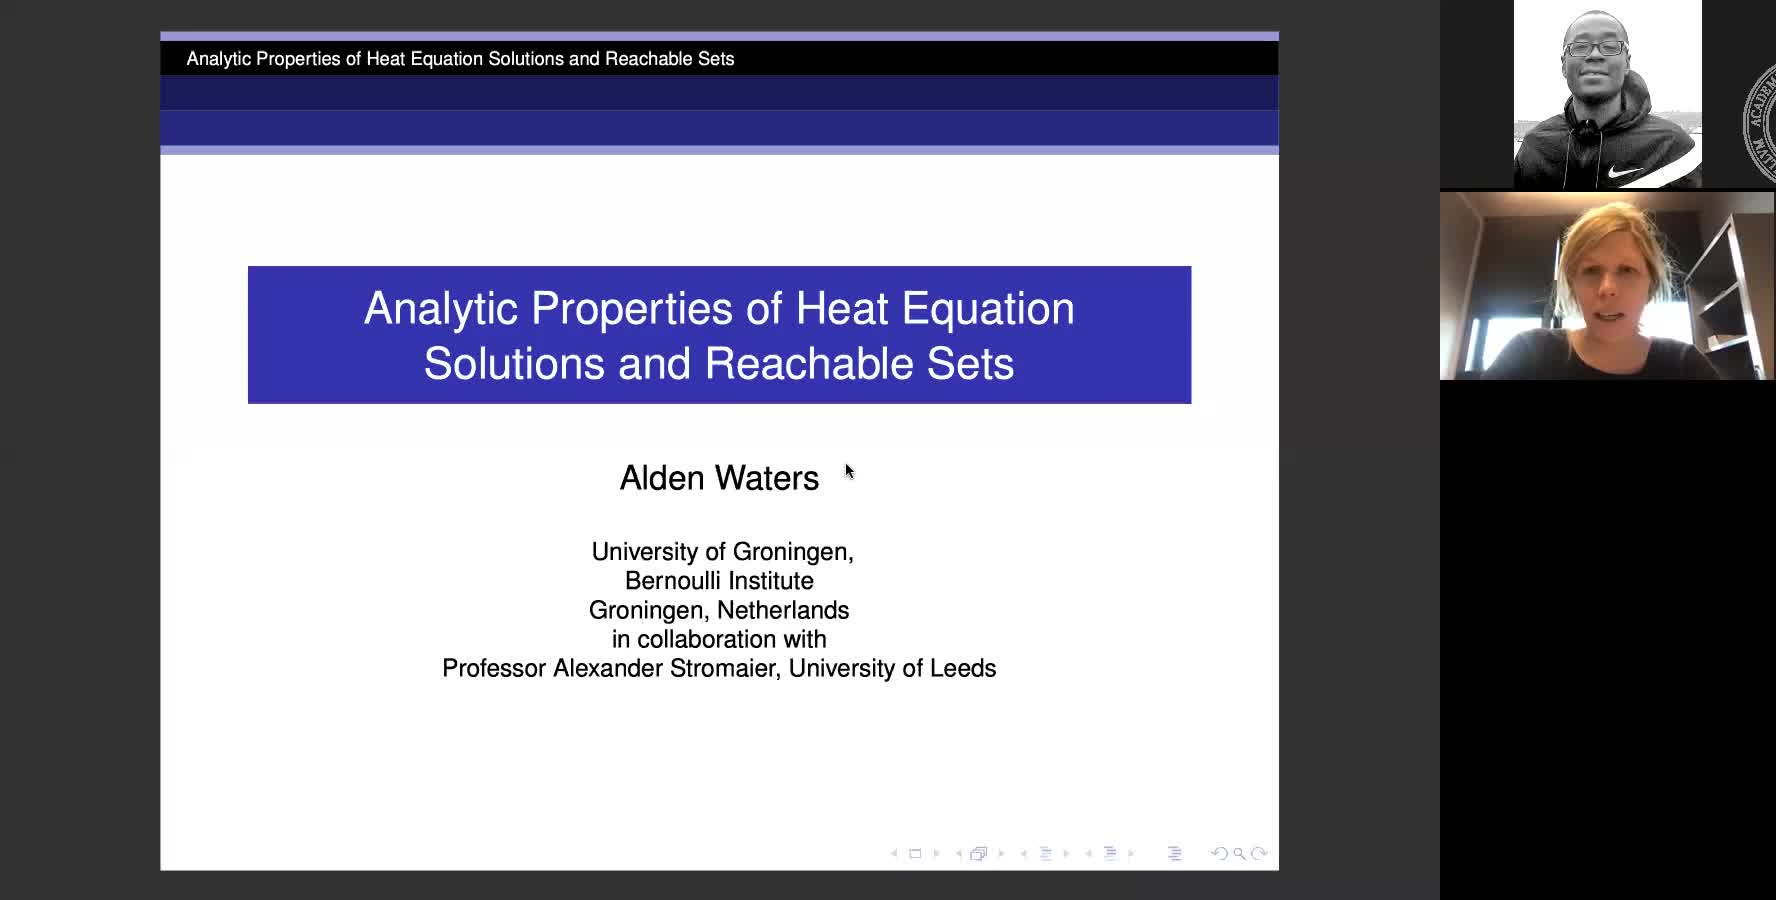 Analytic Properties of Heat Equation Solutions and Reachable Sets (Alden Waters, University of Groningen) preview image